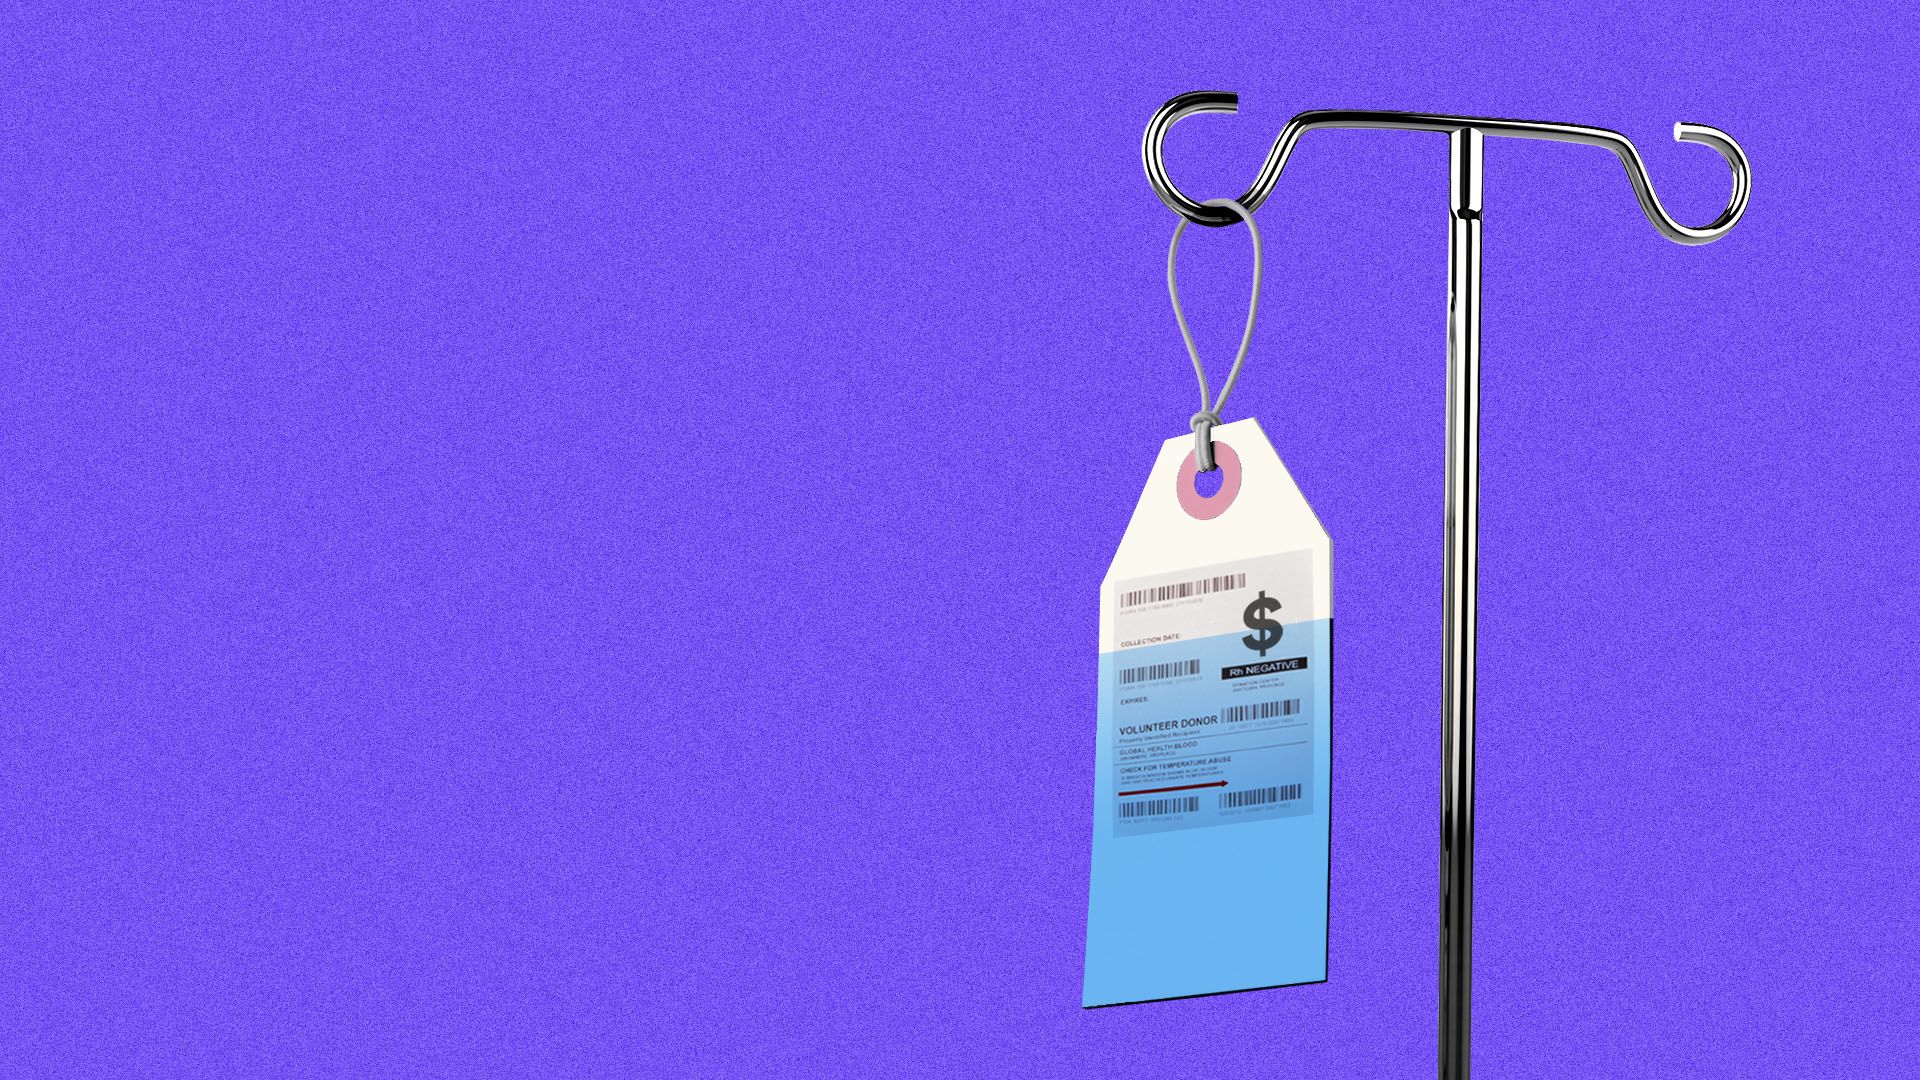 Illustration of a price tag hanging from an IV stand